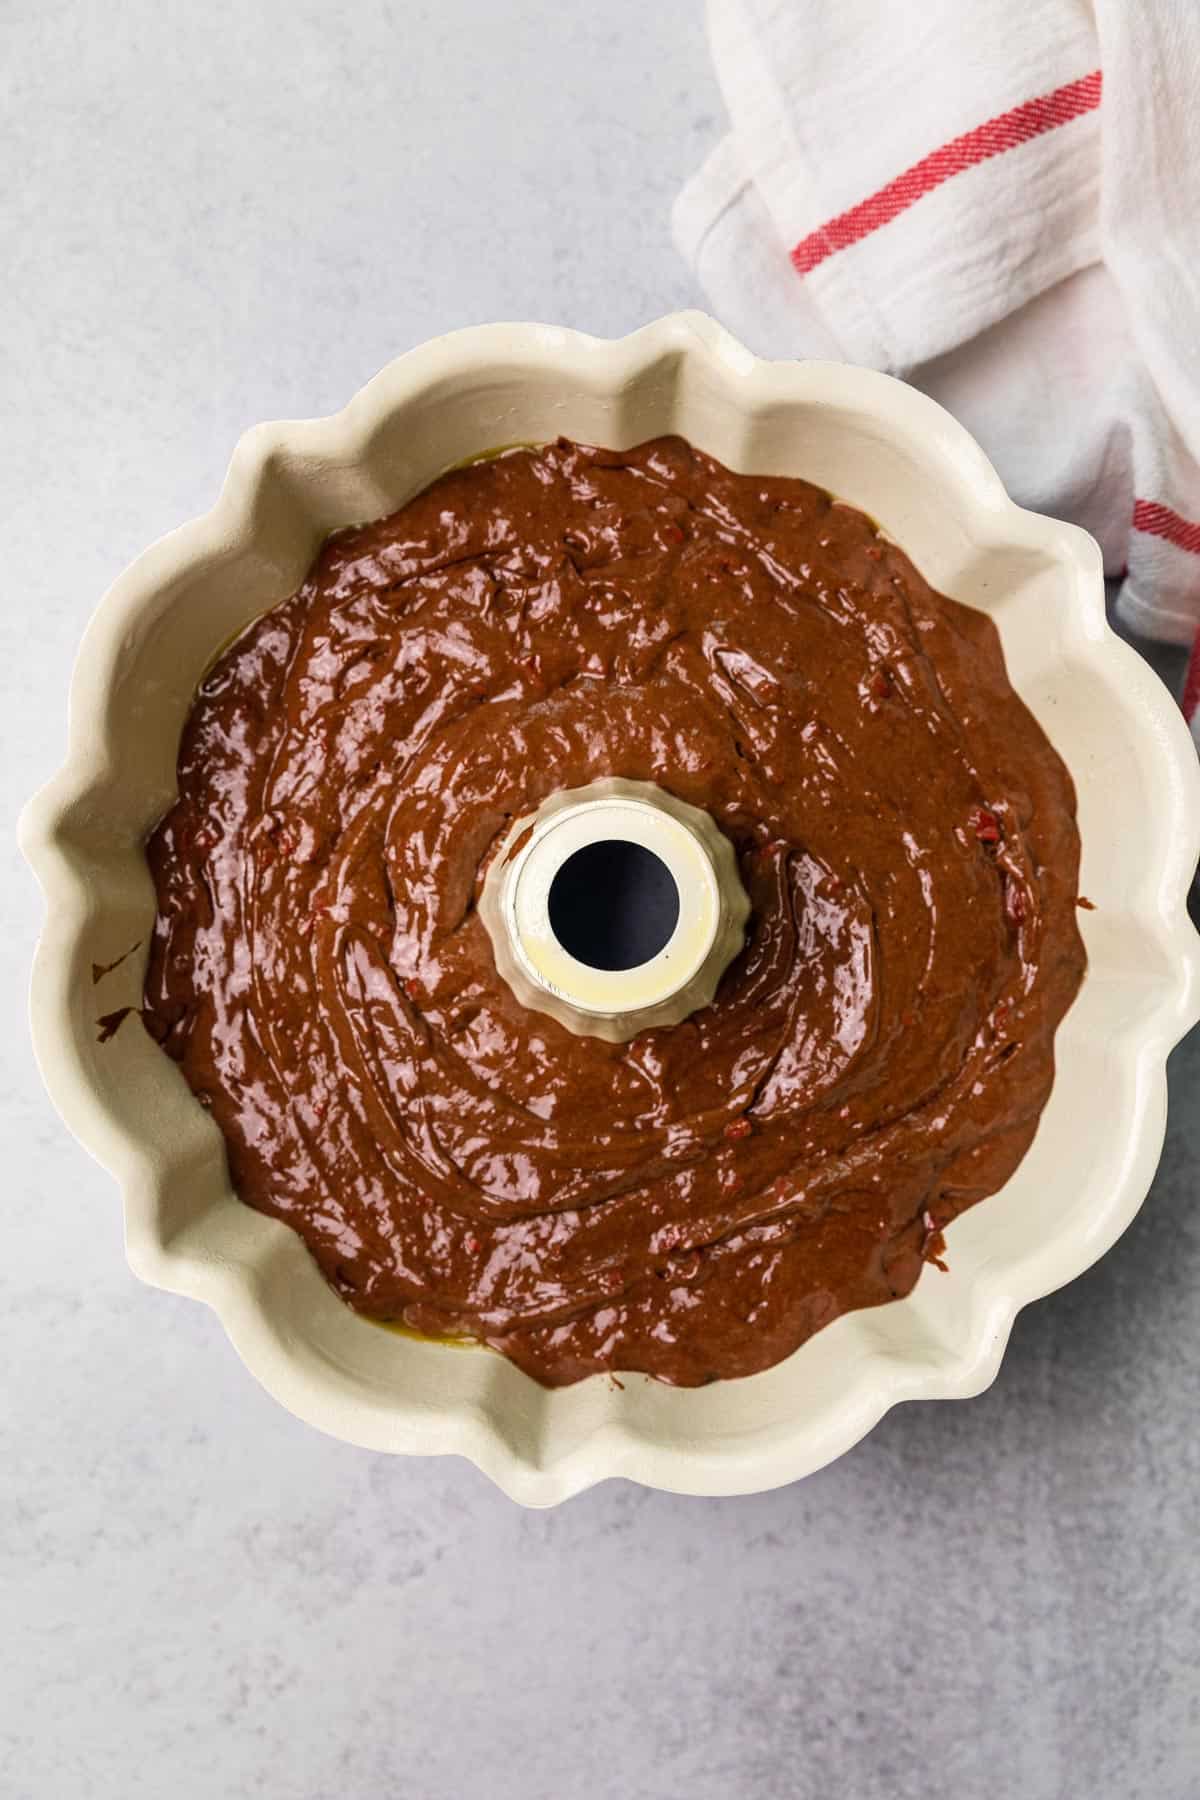 unbaked cake batter in pan